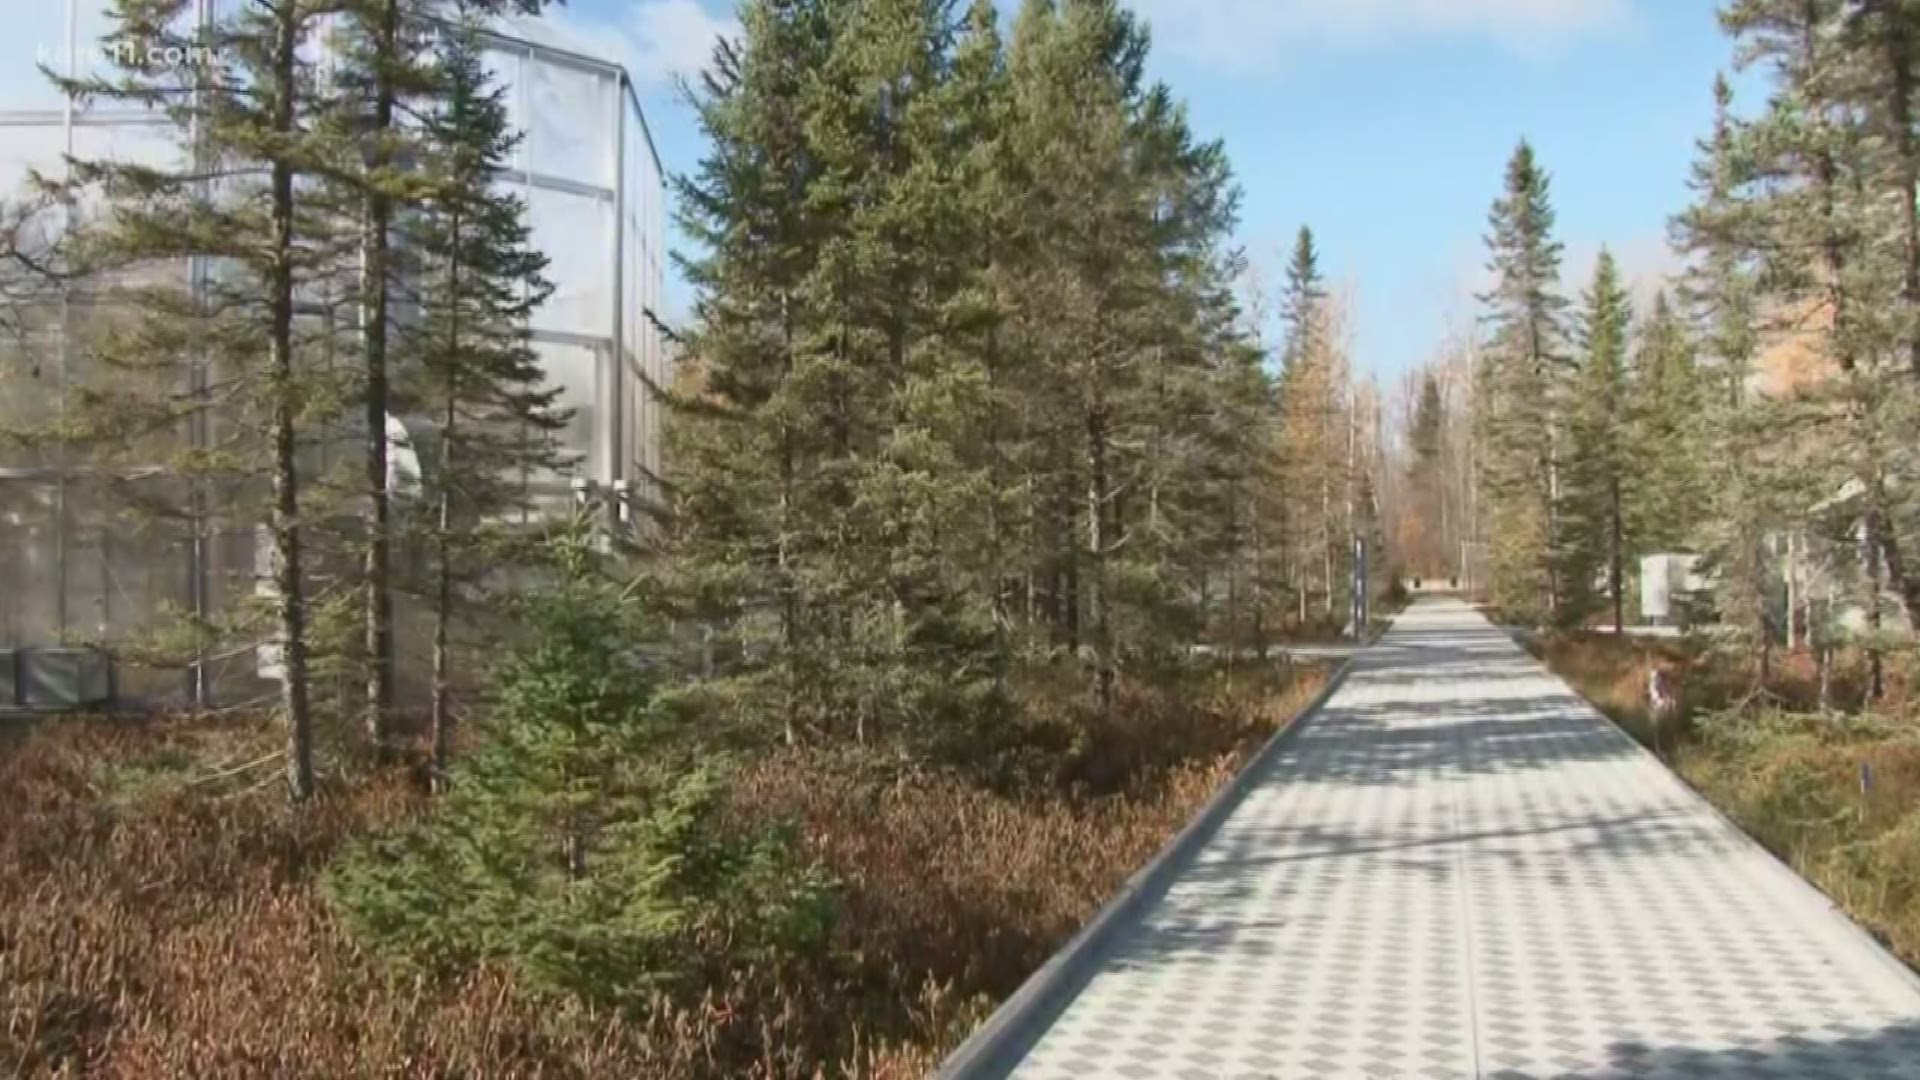 Researchers in northern Minnesota are doing a first of its kind climate change experiment.